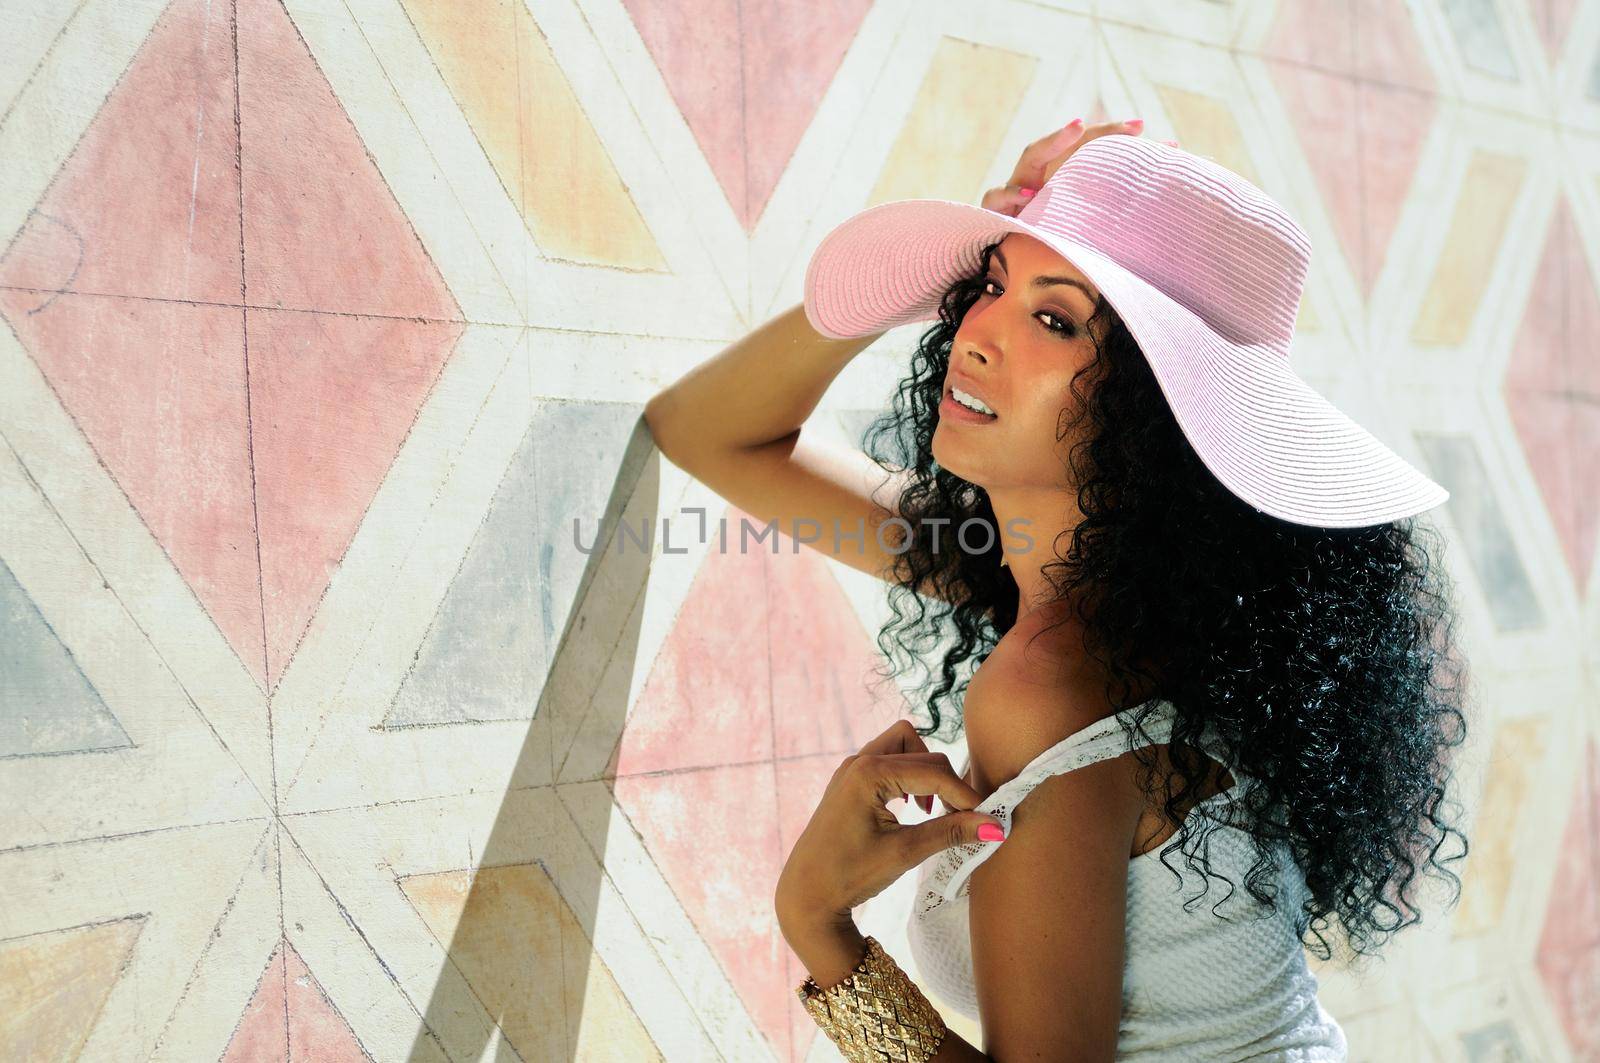 Portrait of a young black woman, model of fashion wearing dress and sun hat, with afro hairstyle in urban background